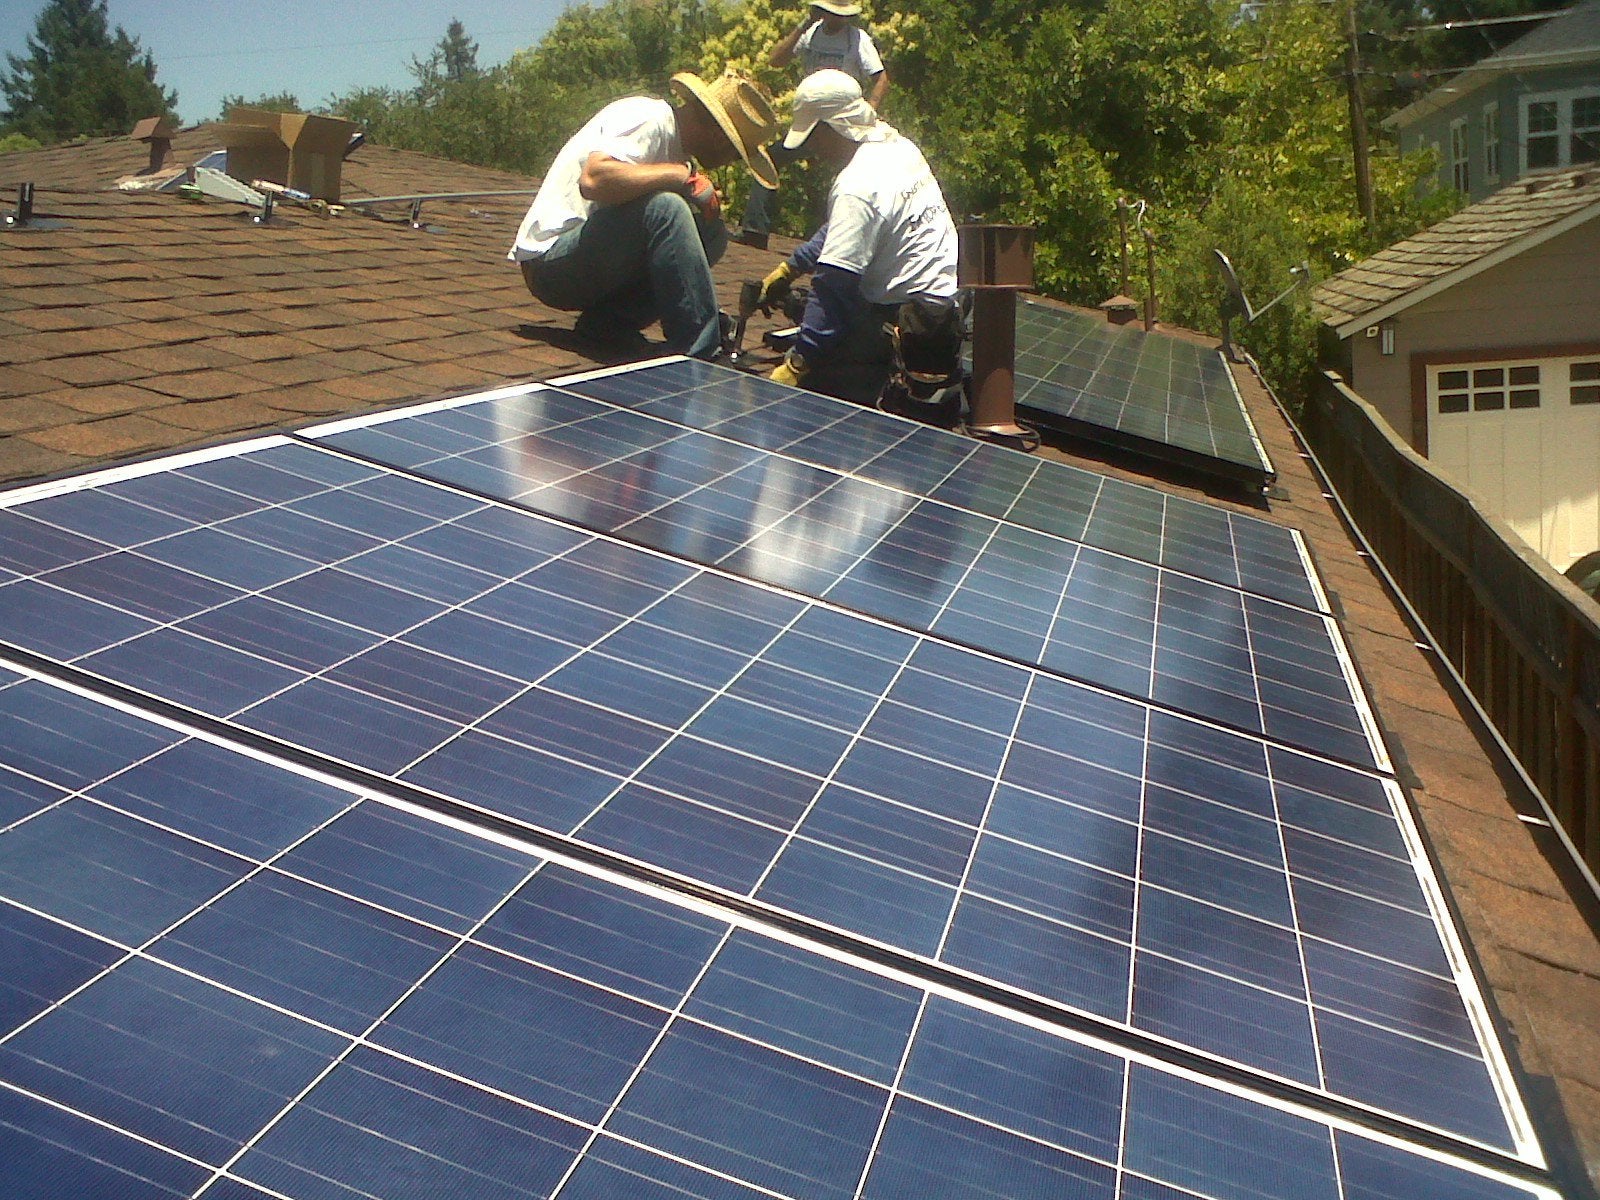 Westinghouse Solar installation by Earth Electric. Another beaut